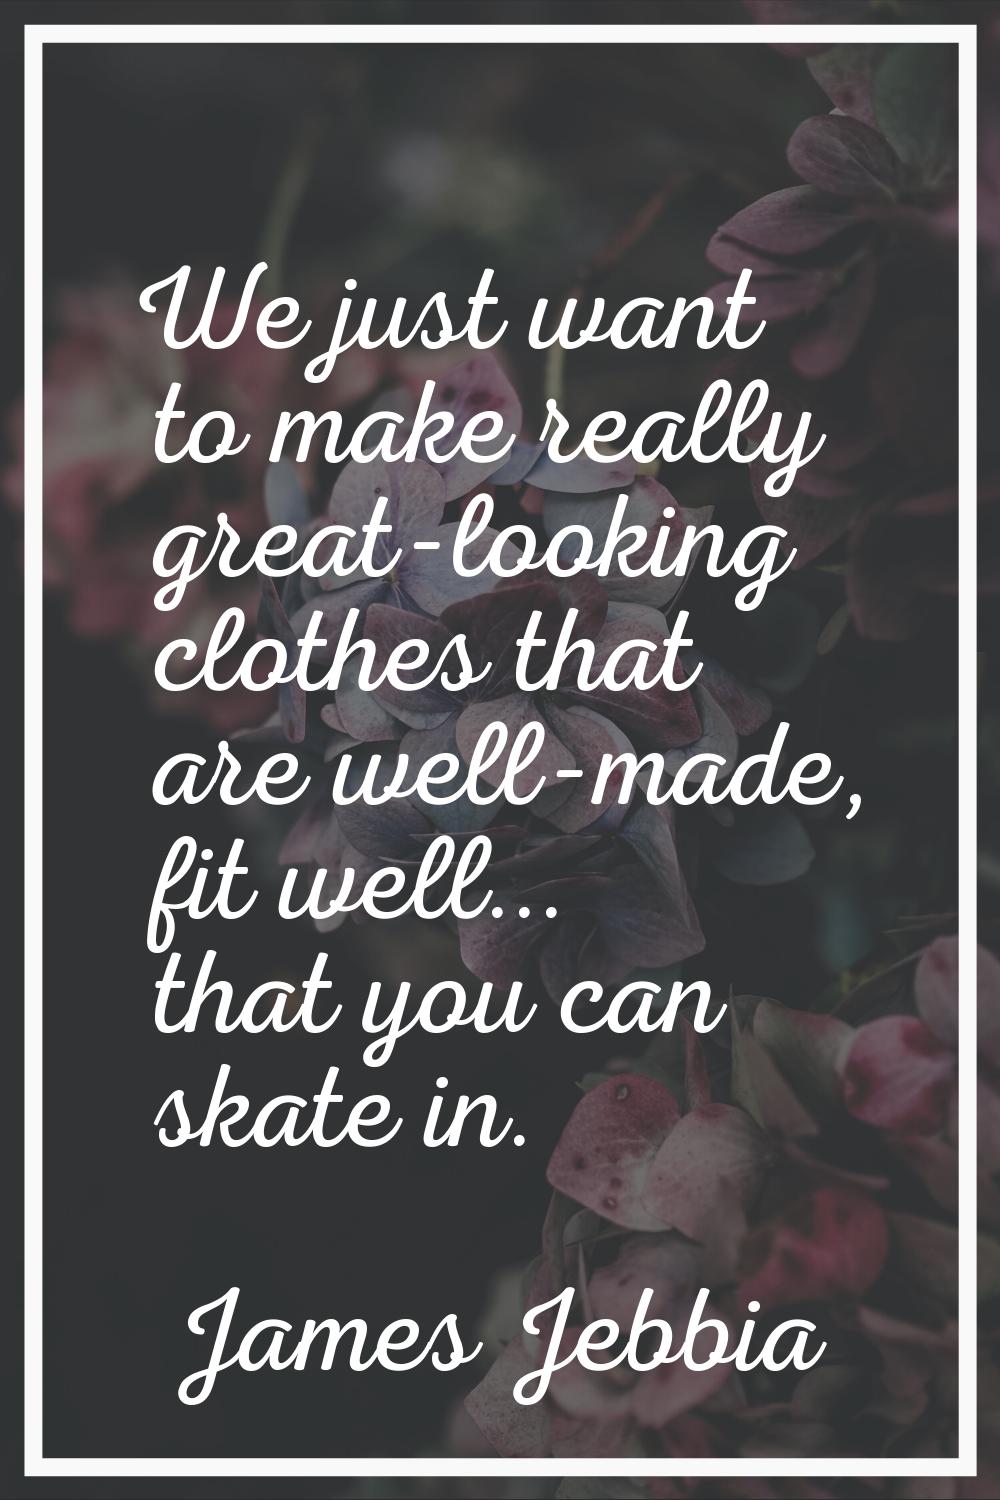 We just want to make really great-looking clothes that are well-made, fit well... that you can skat